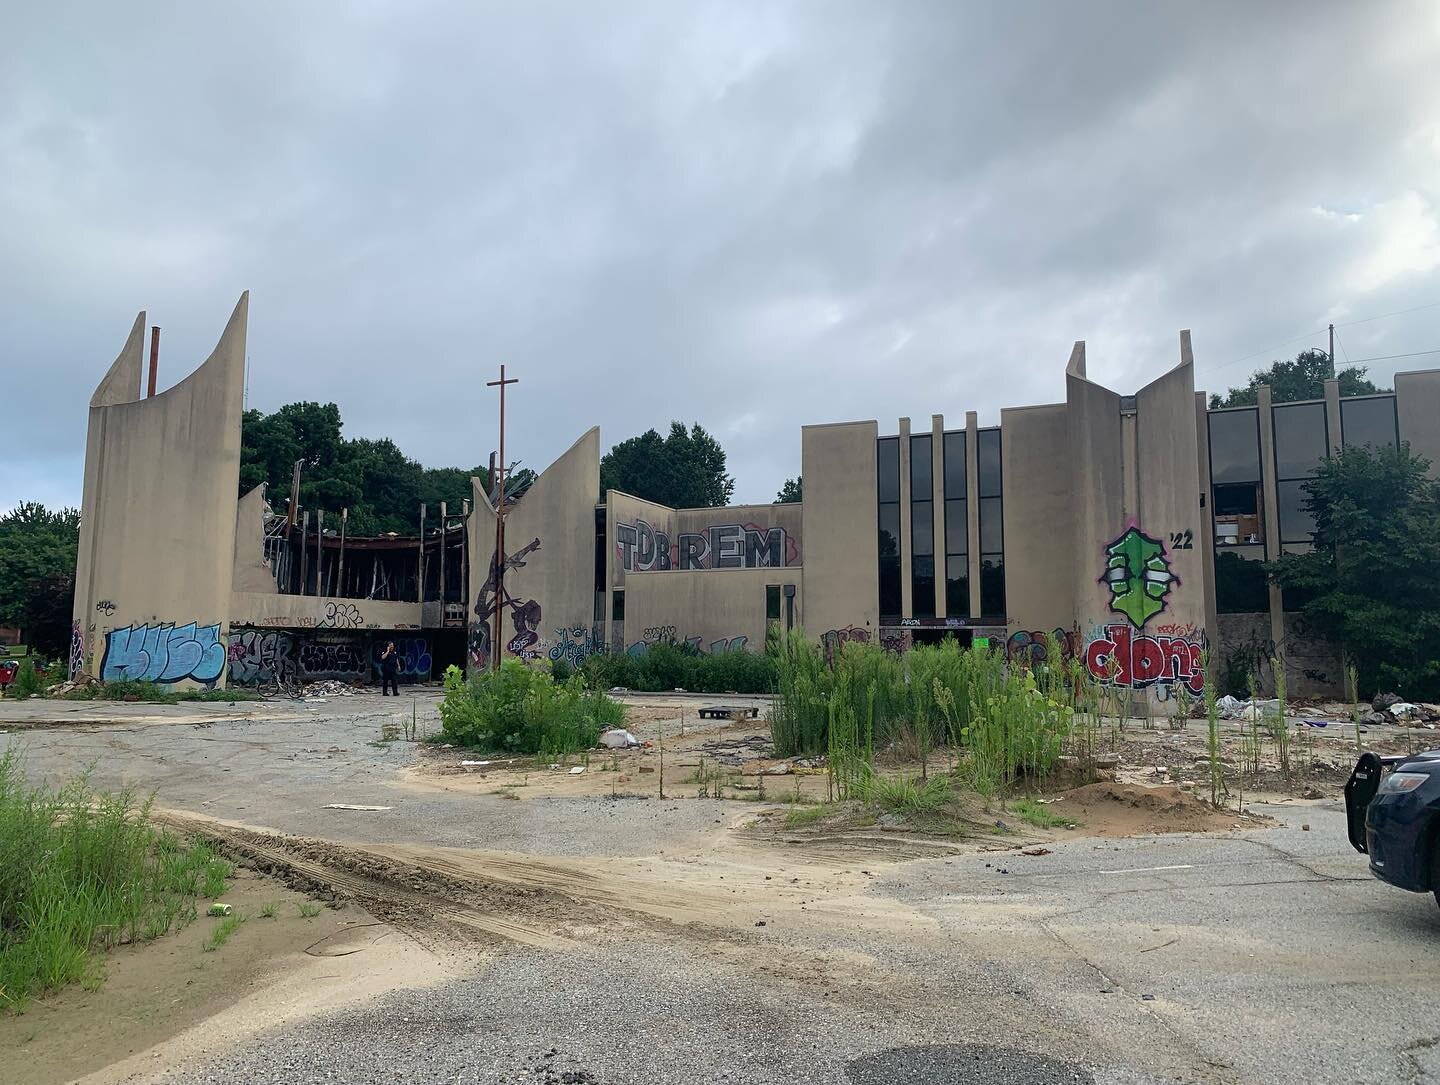 Yesterday morning demolition began on the abandoned church located at 277 Clifton Street. As many of you know, there were several unsheltered individuals taking shelter here. I am grateful to Gateway, PAD, Intown Collaborative Ministries, and Partner